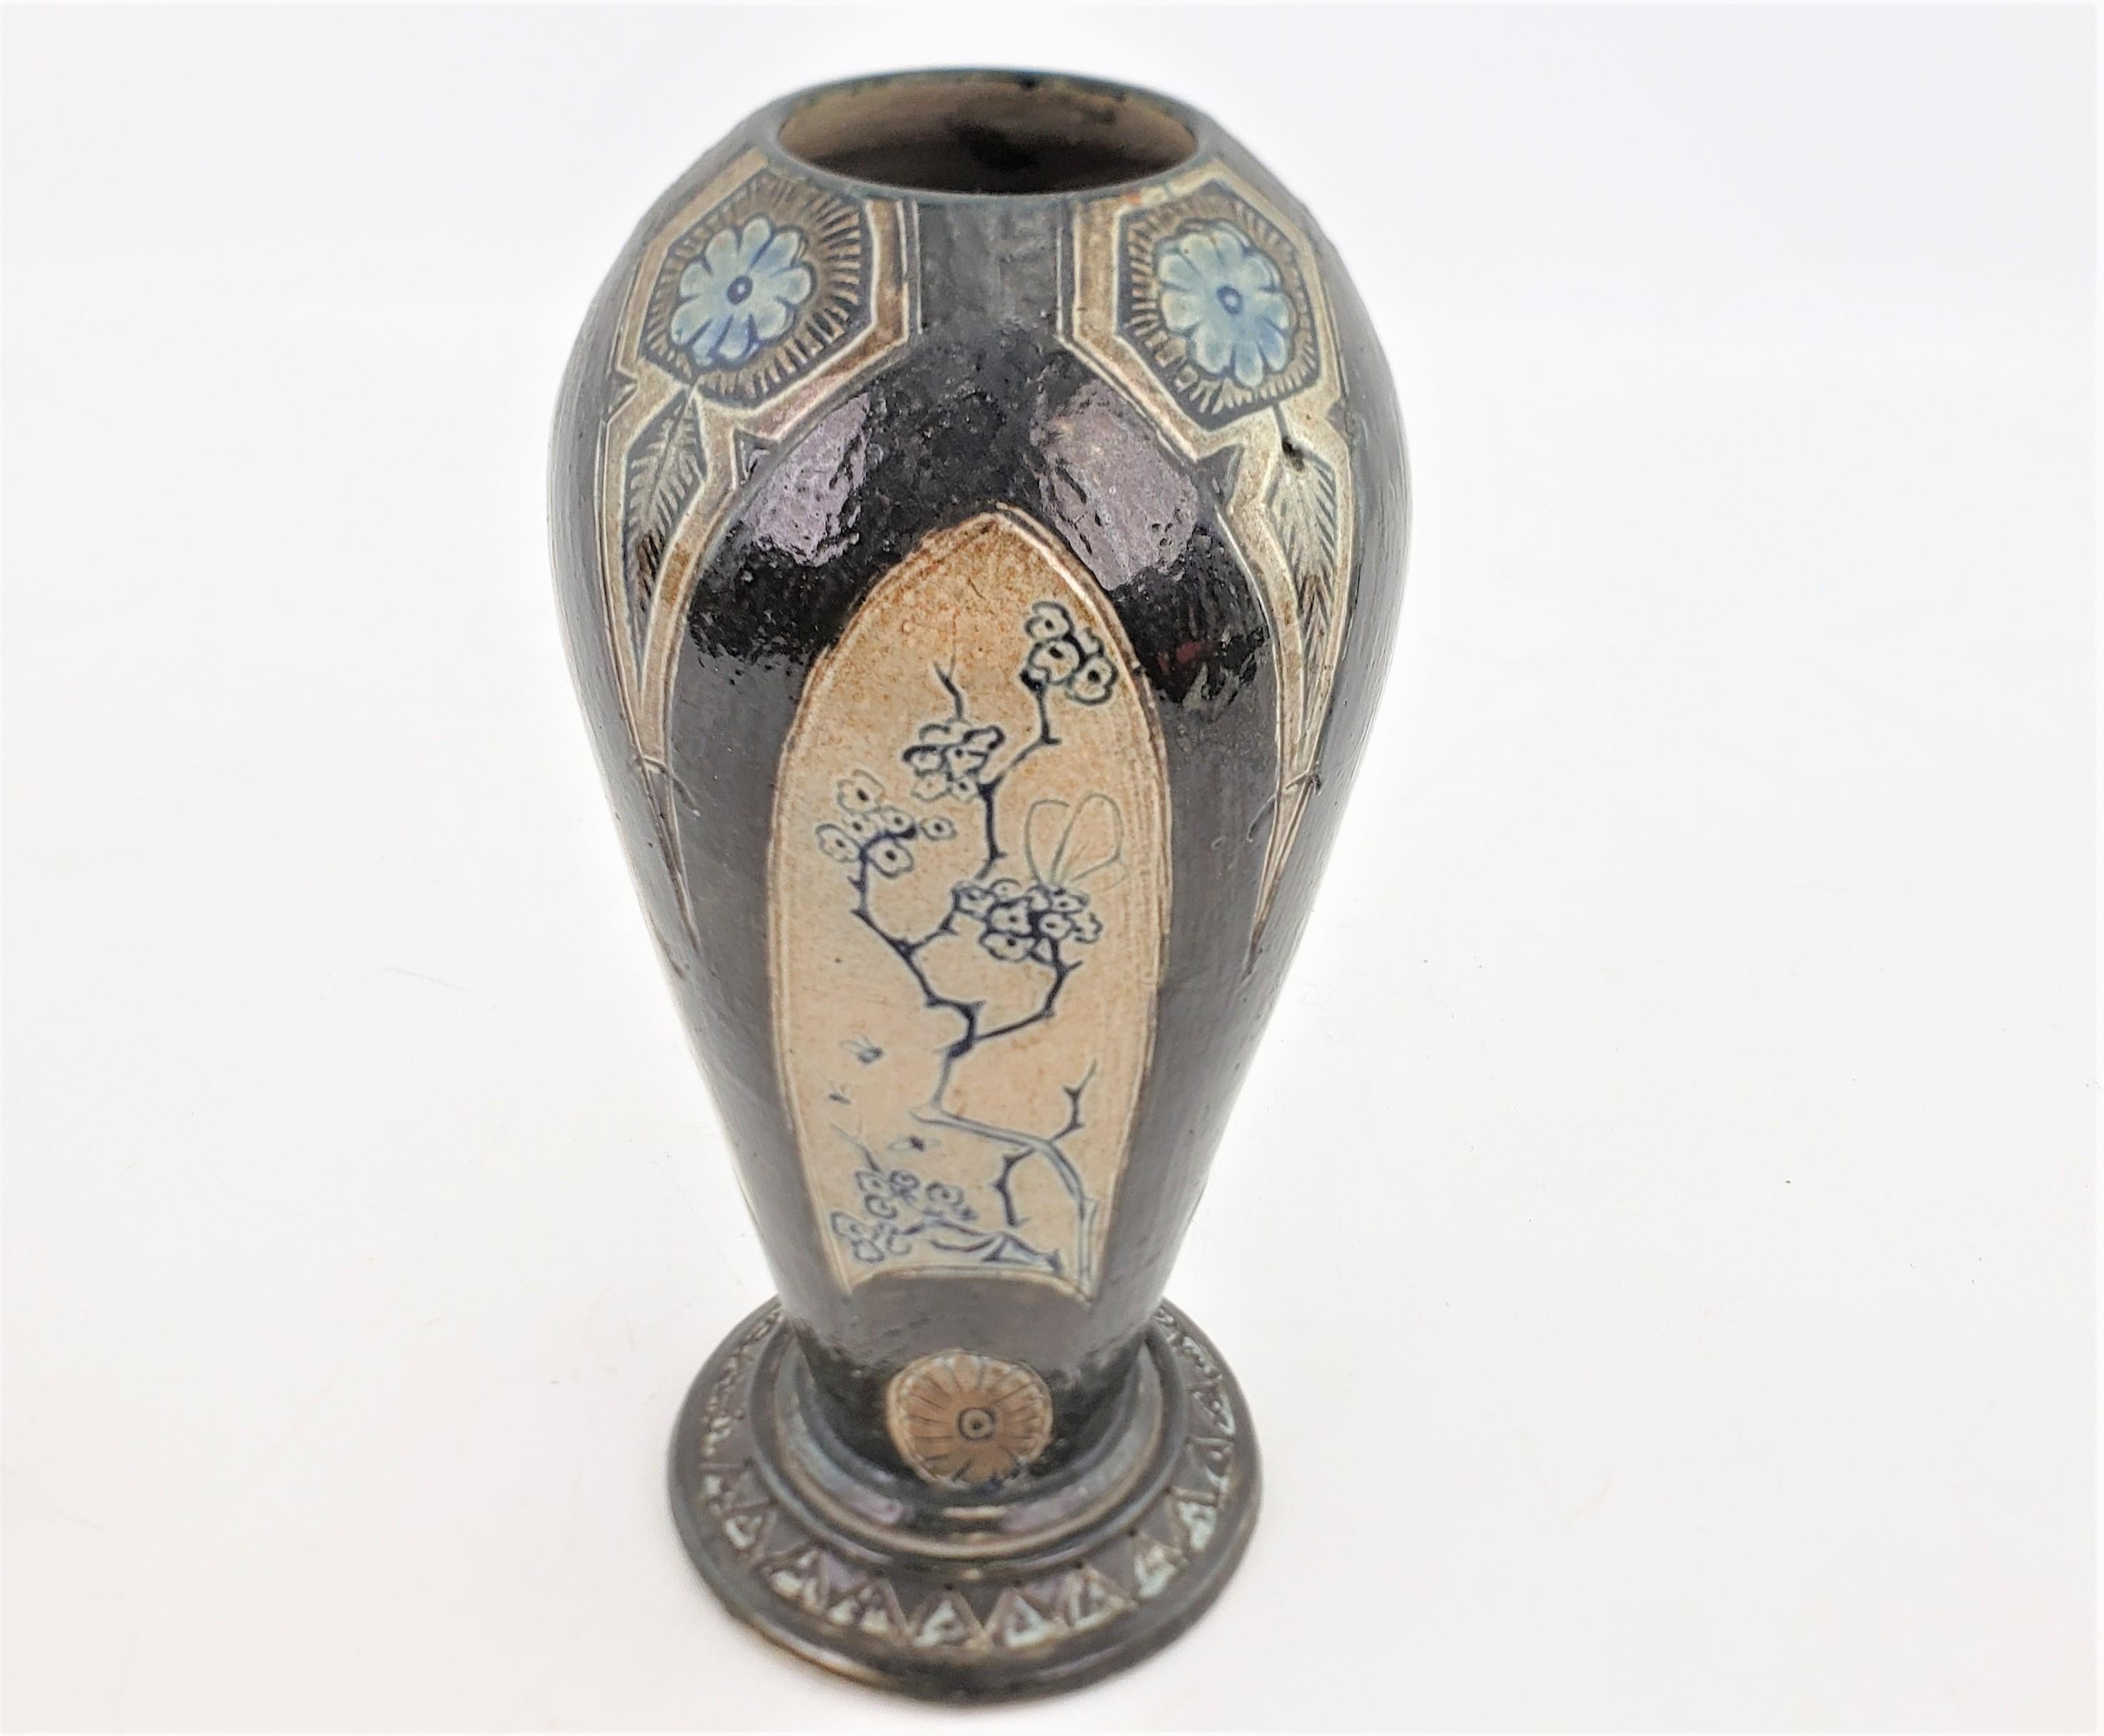 This antique hand-crafted art pottery vase was done by the renowned Martin Brothers factory of England, in approximately 1890 in the period Aesthetic Movement style. The vase is done with a glazed stoneware, and has an Asian inspired motif with blue